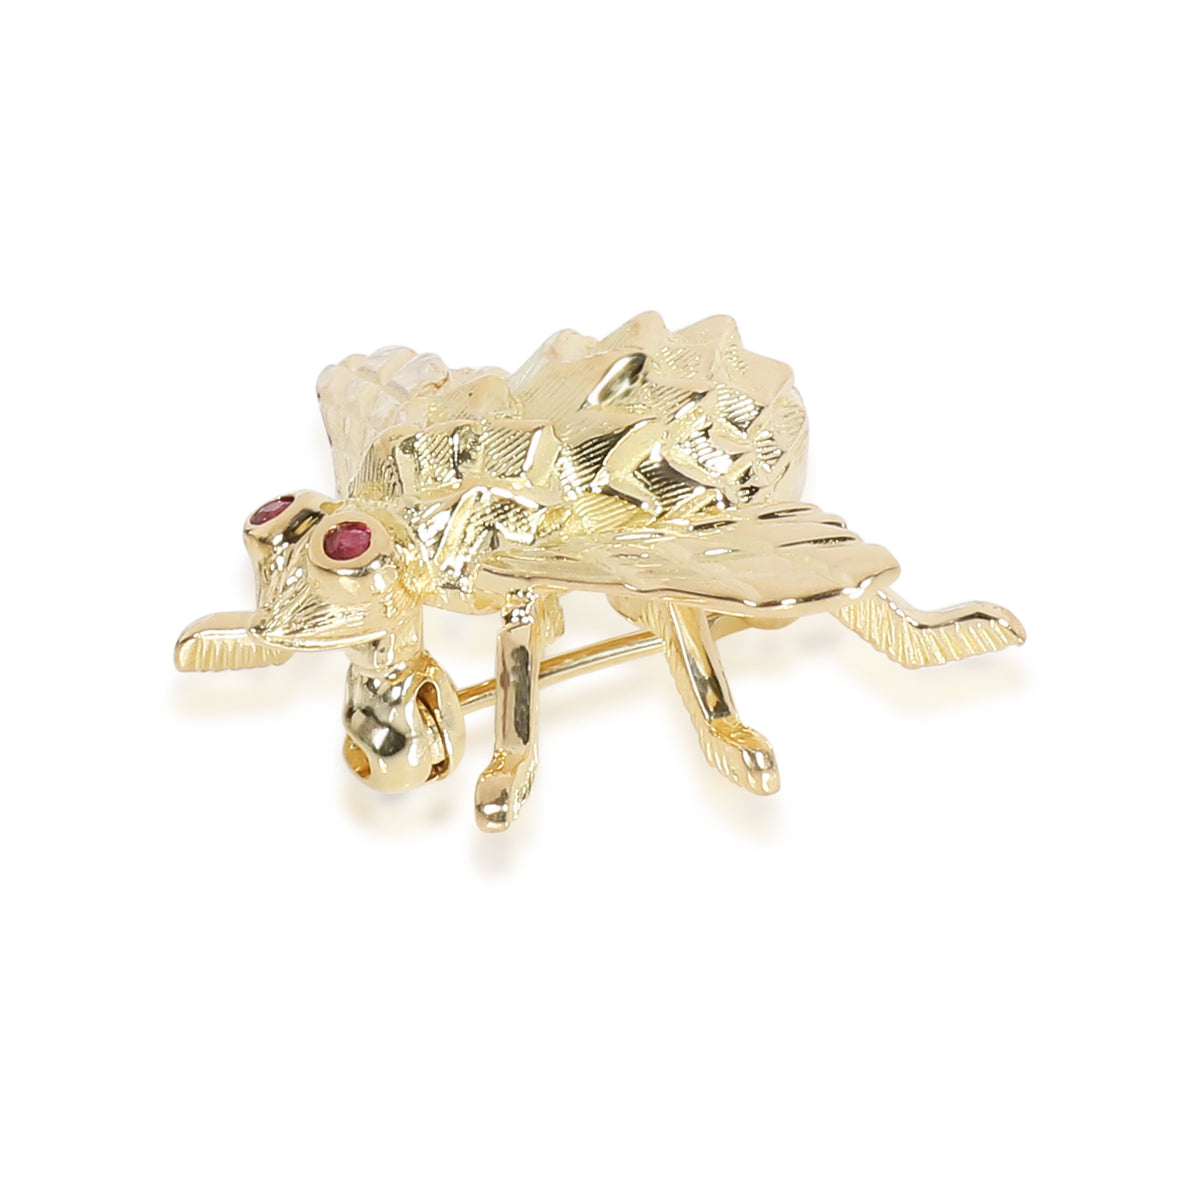 Tiffany & Co. Vintage Fly Brooch with Ruby Eyes in 18K Yellow Gold